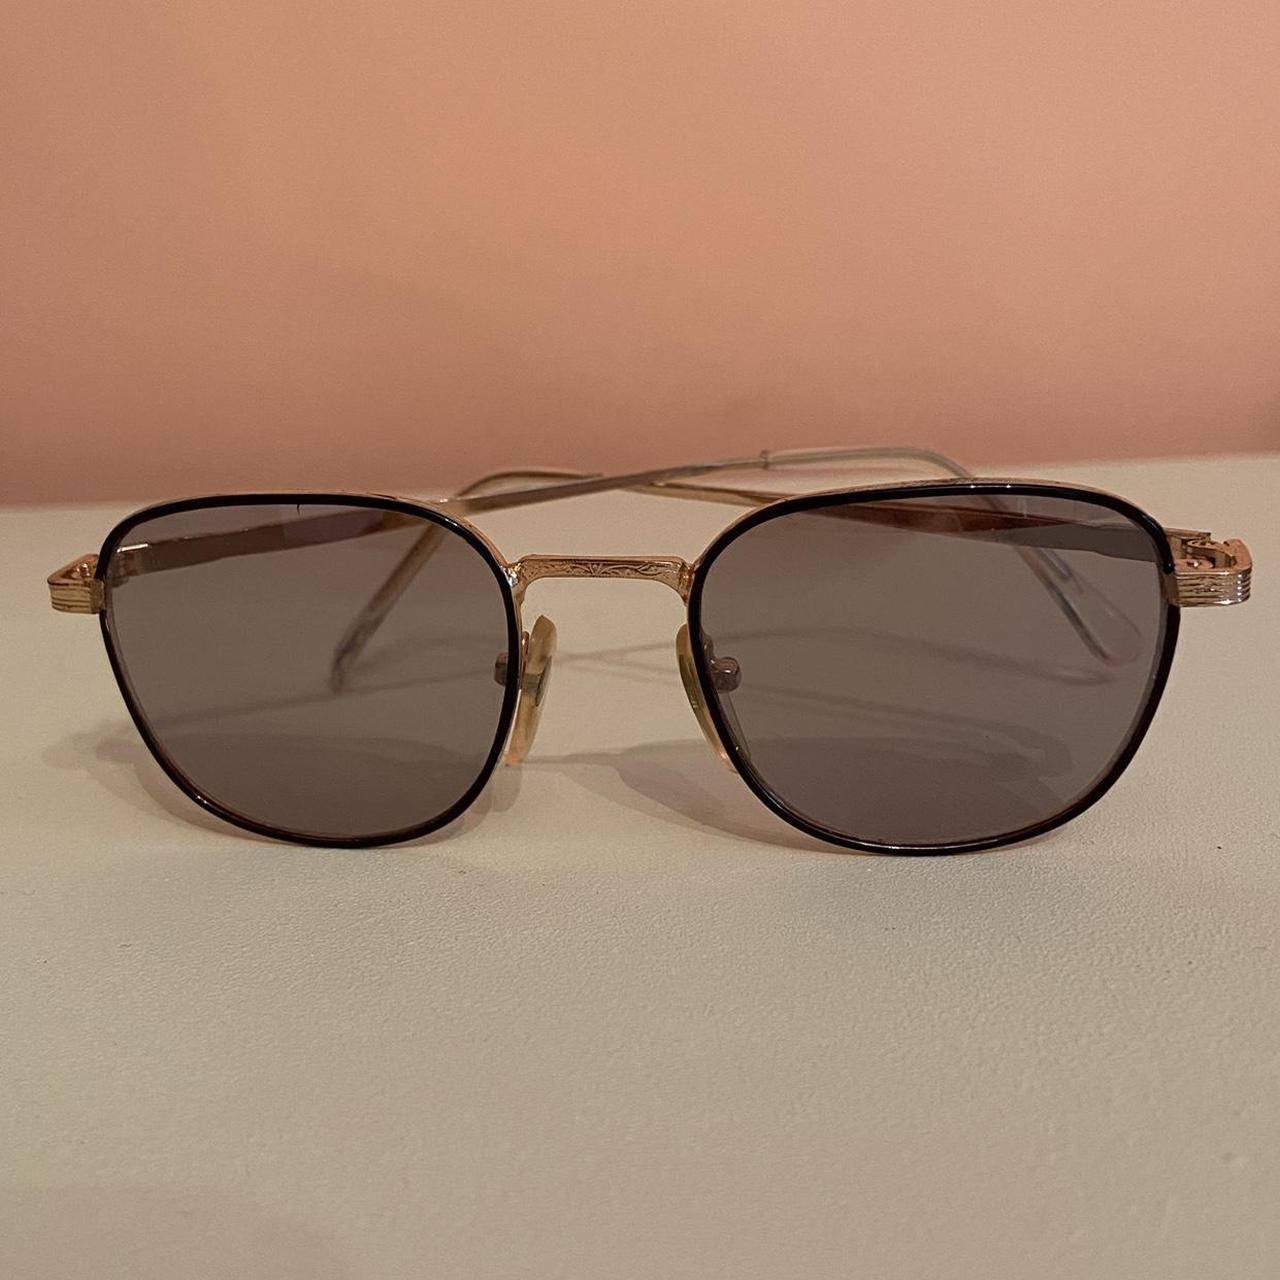 Oliver Peoples Women's Gold Sunglasses (2)